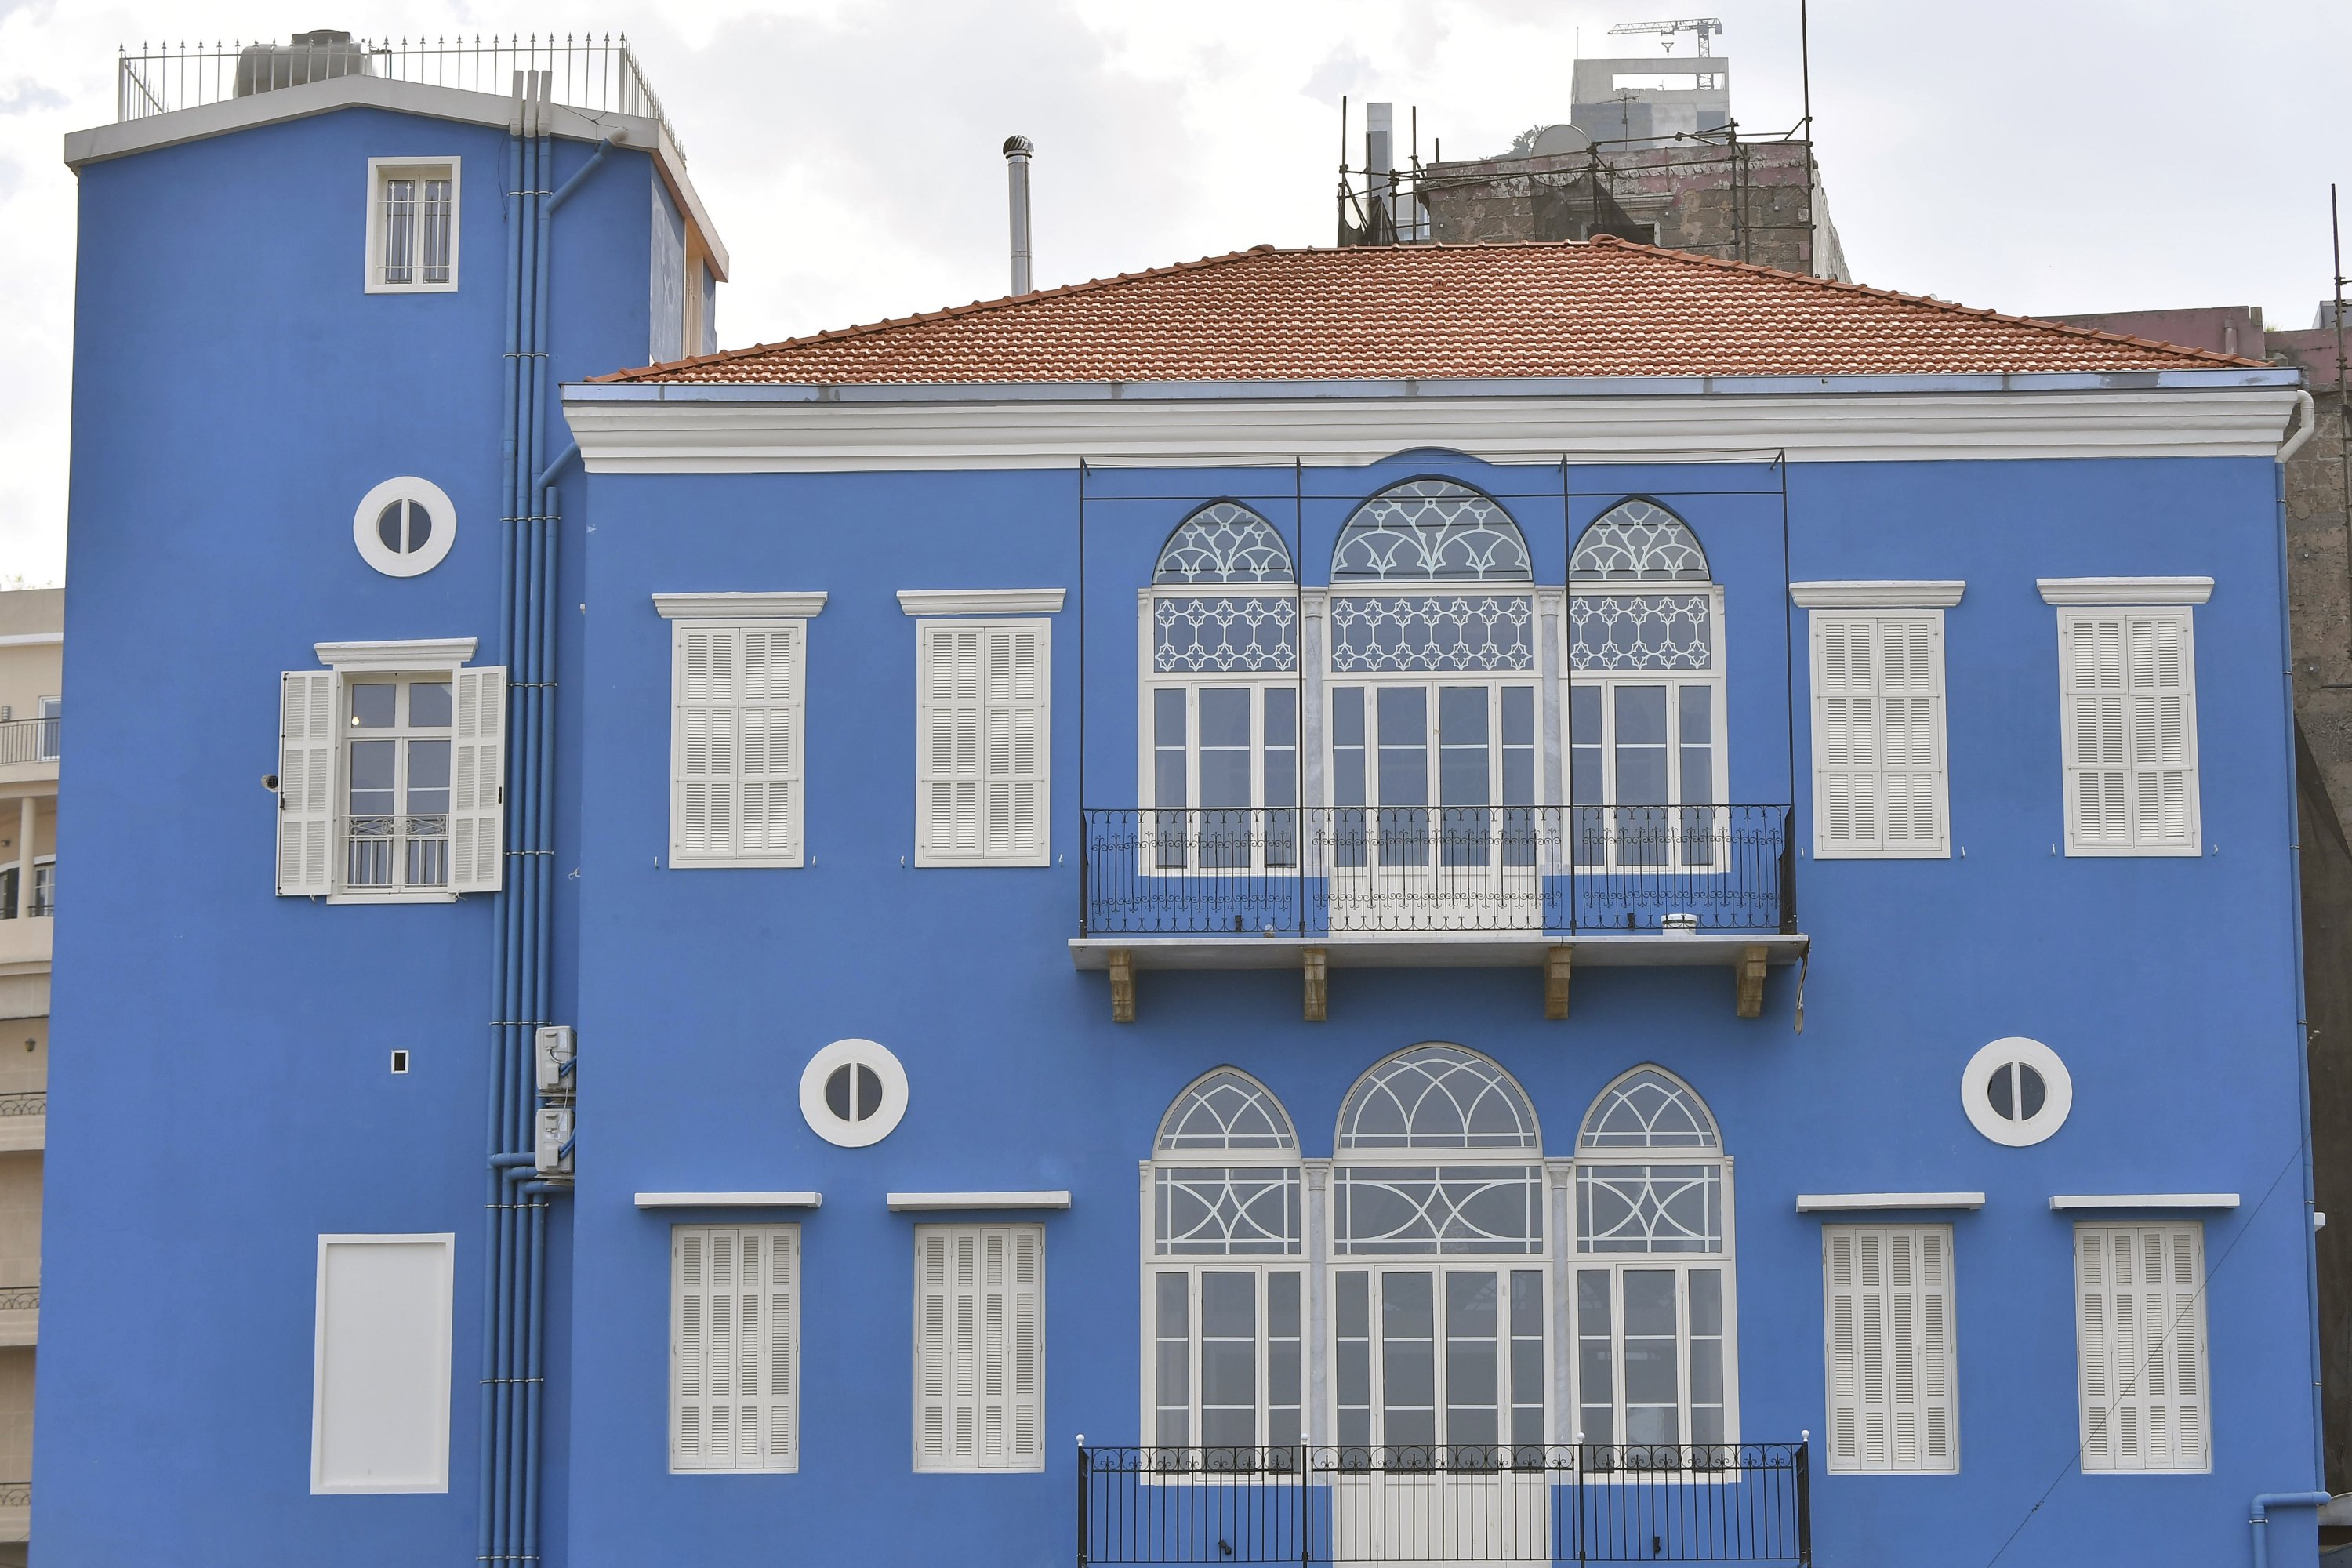 Situated on Beirut's waterfront, the Blue House is one of the important structures that was constructed in the late 19th century, Beirut, Lebanon, Dec.10, 2022. (AA Photo)